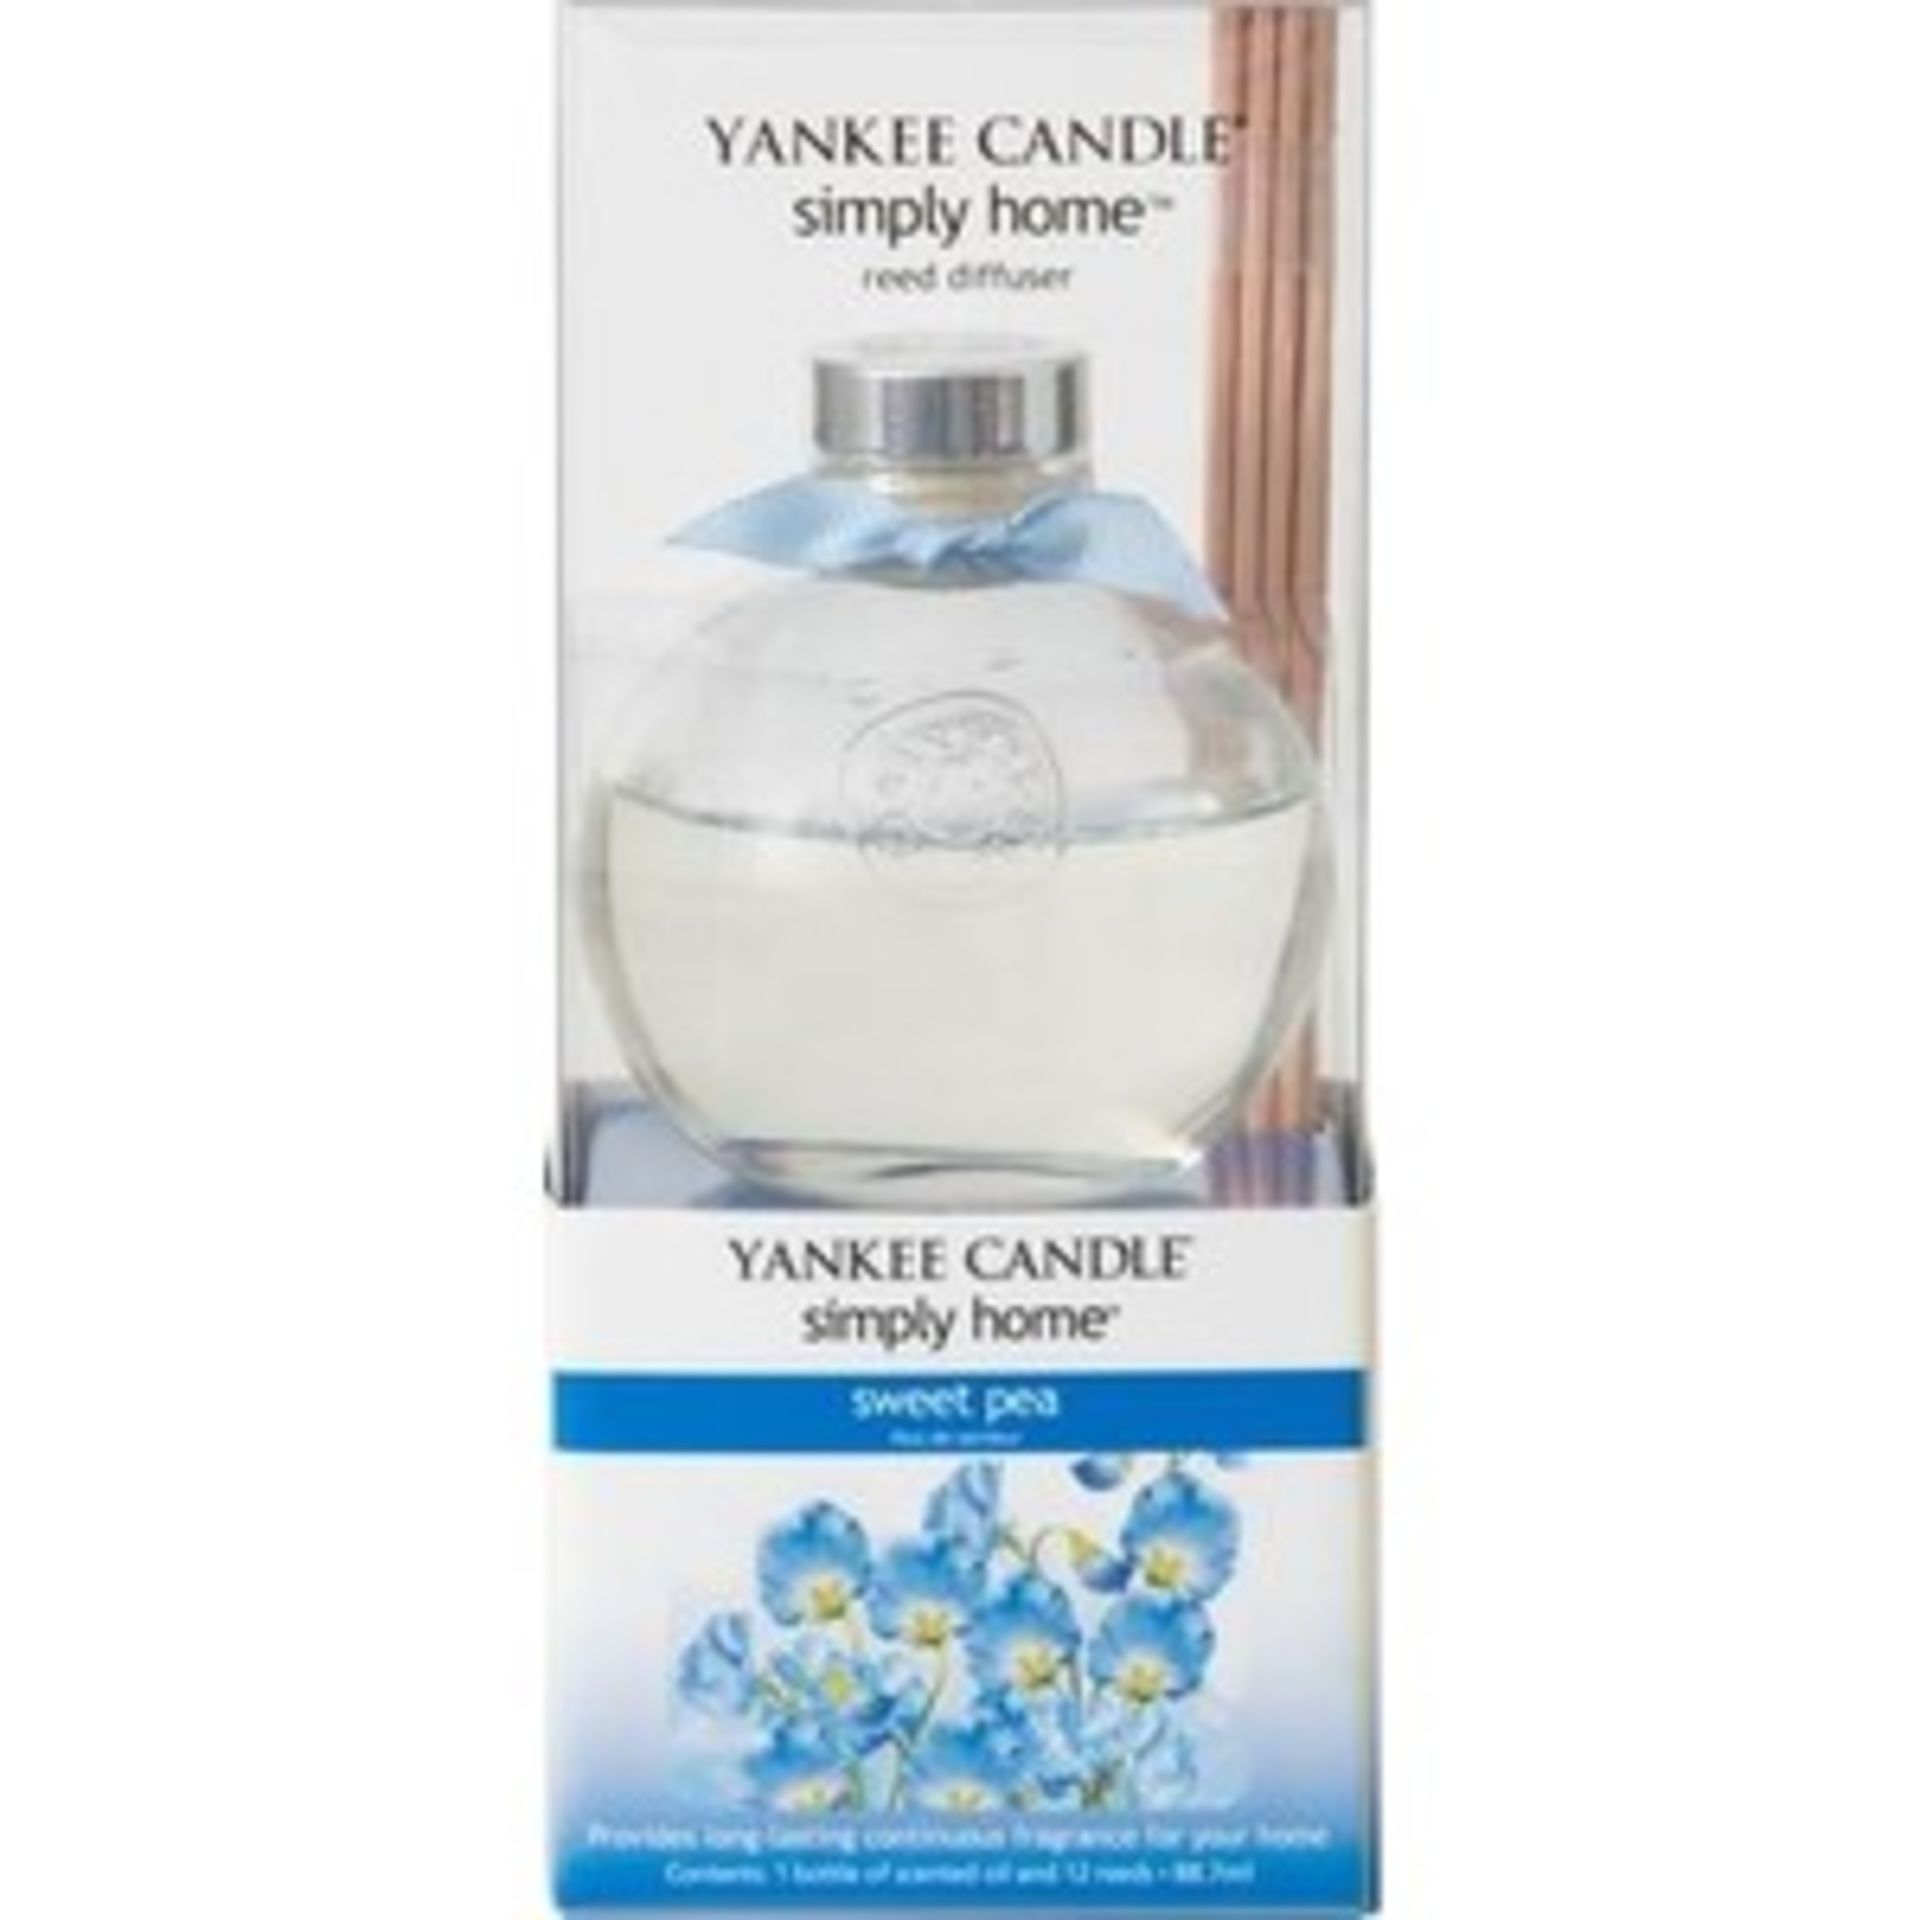 V Brand New Yankee Candle Reed Diffuser Sweet Pea Amazon Price £11.87 X 2 YOUR BID PRICE TO BE